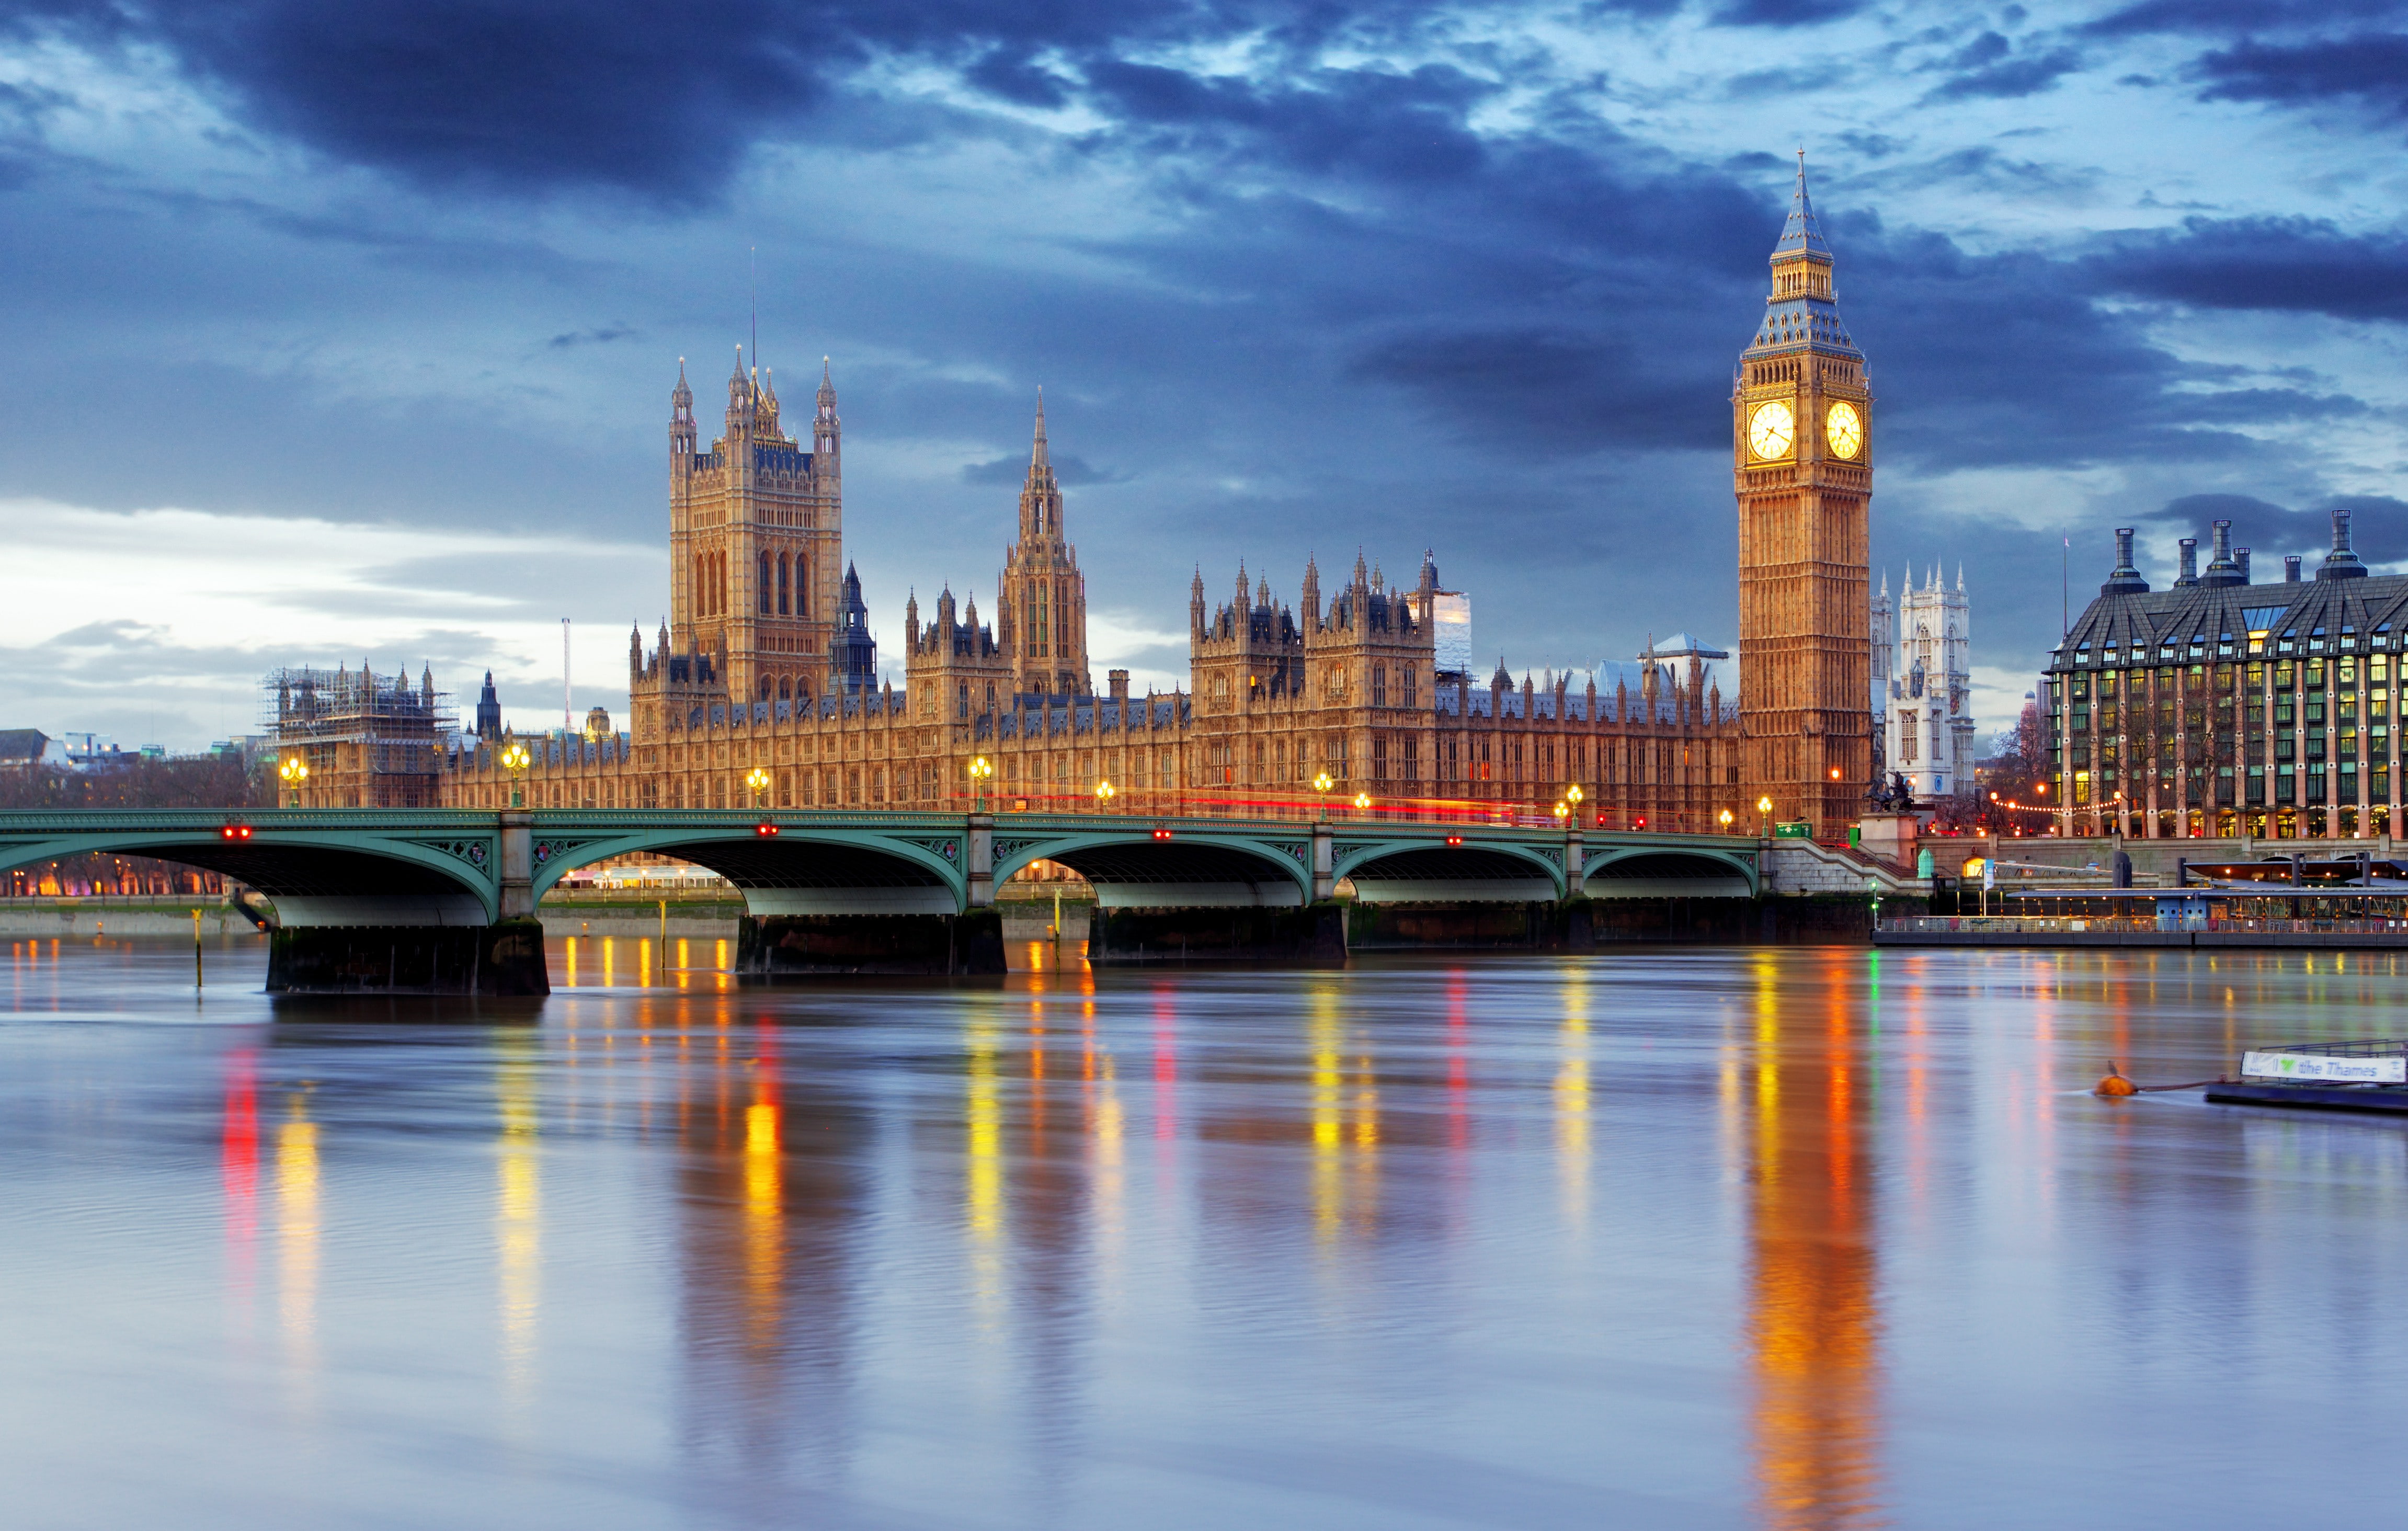 London, England, Thames River,, body of water, UK, Big Ben, Westminster Abbey